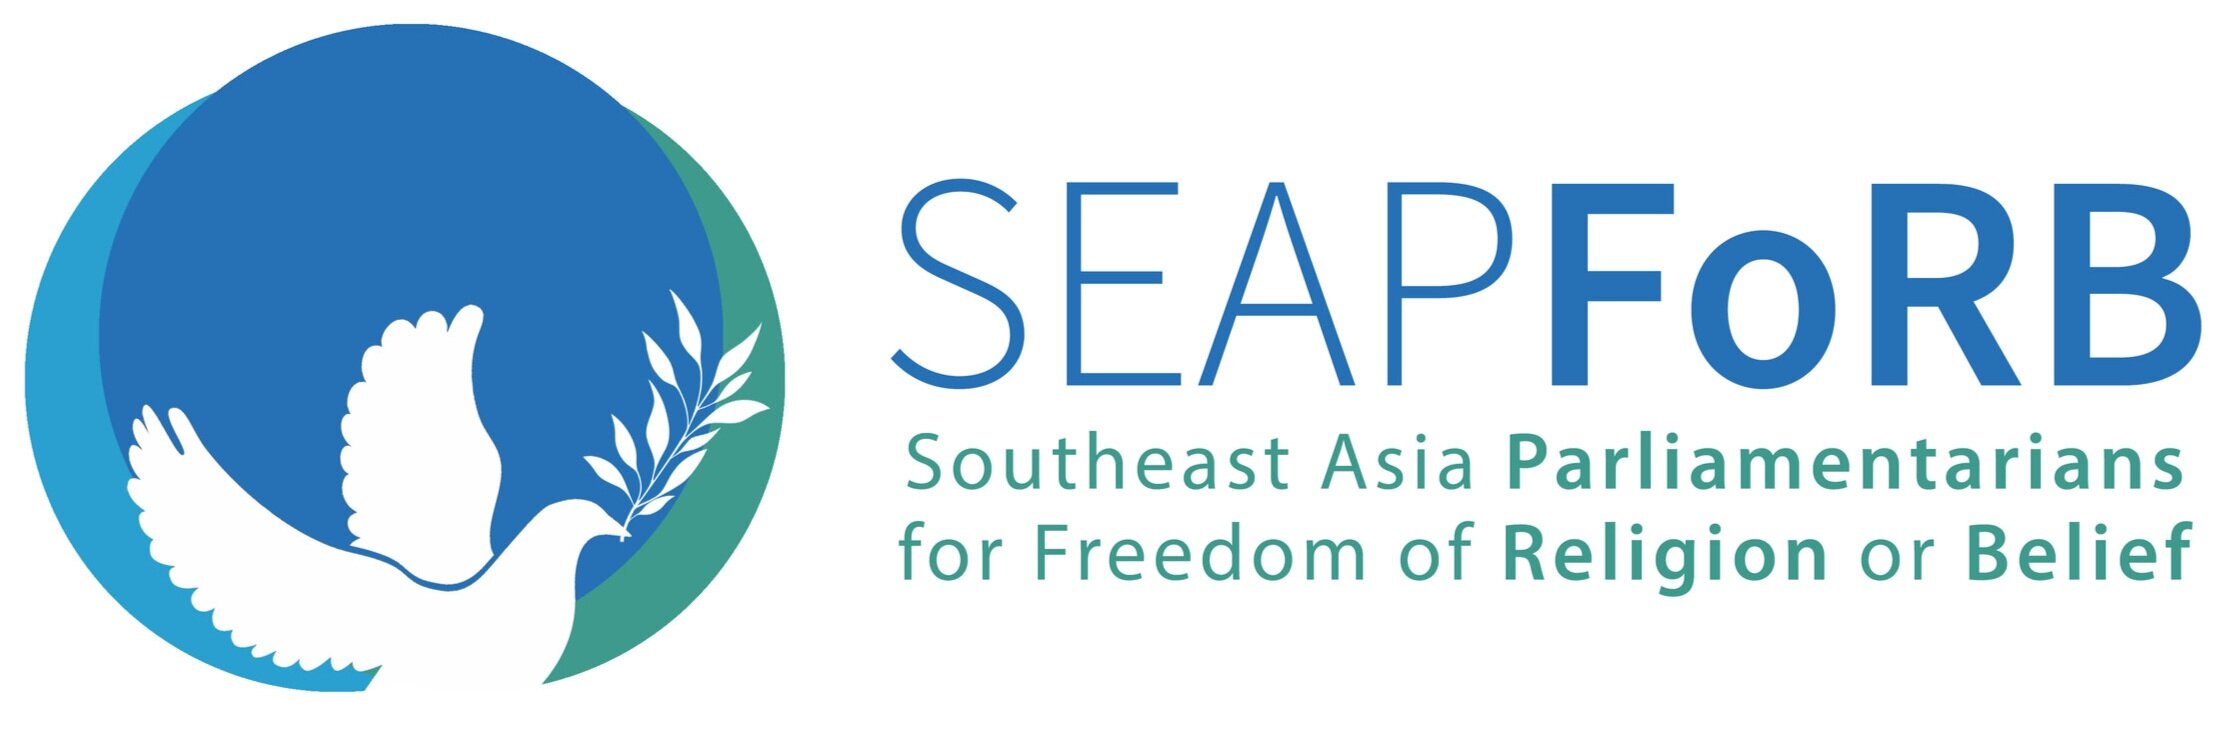 Freedom of Religion or Belief in Southeast Asia